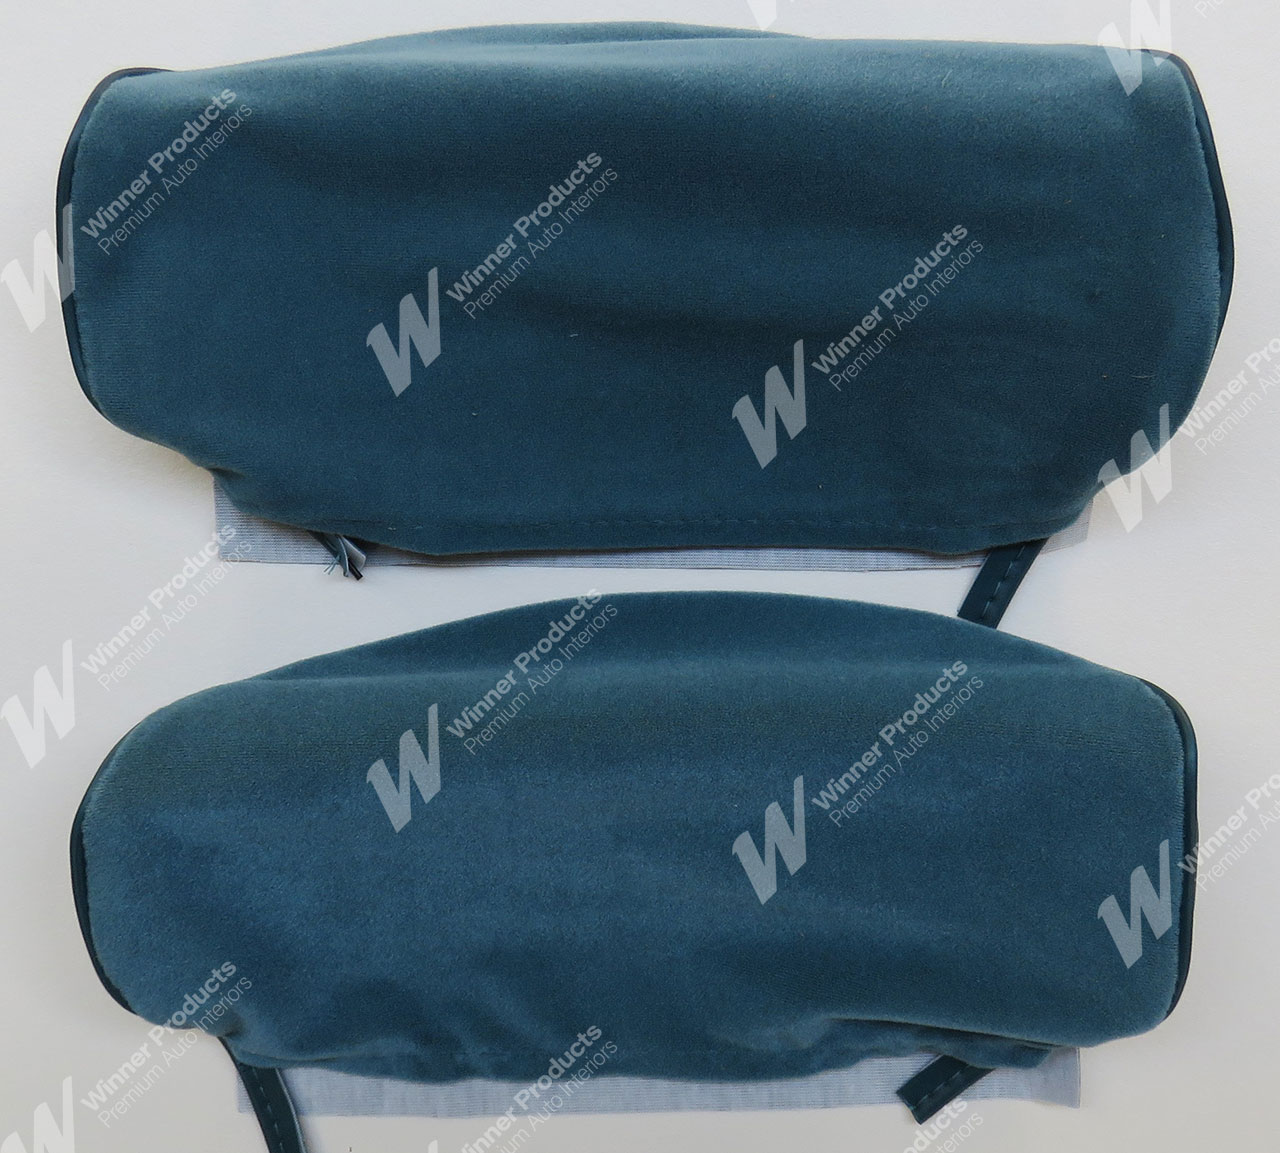 Holden Commodore VK SS Sedan 23X Cerulean Seat Covers (Image 4 of 6)